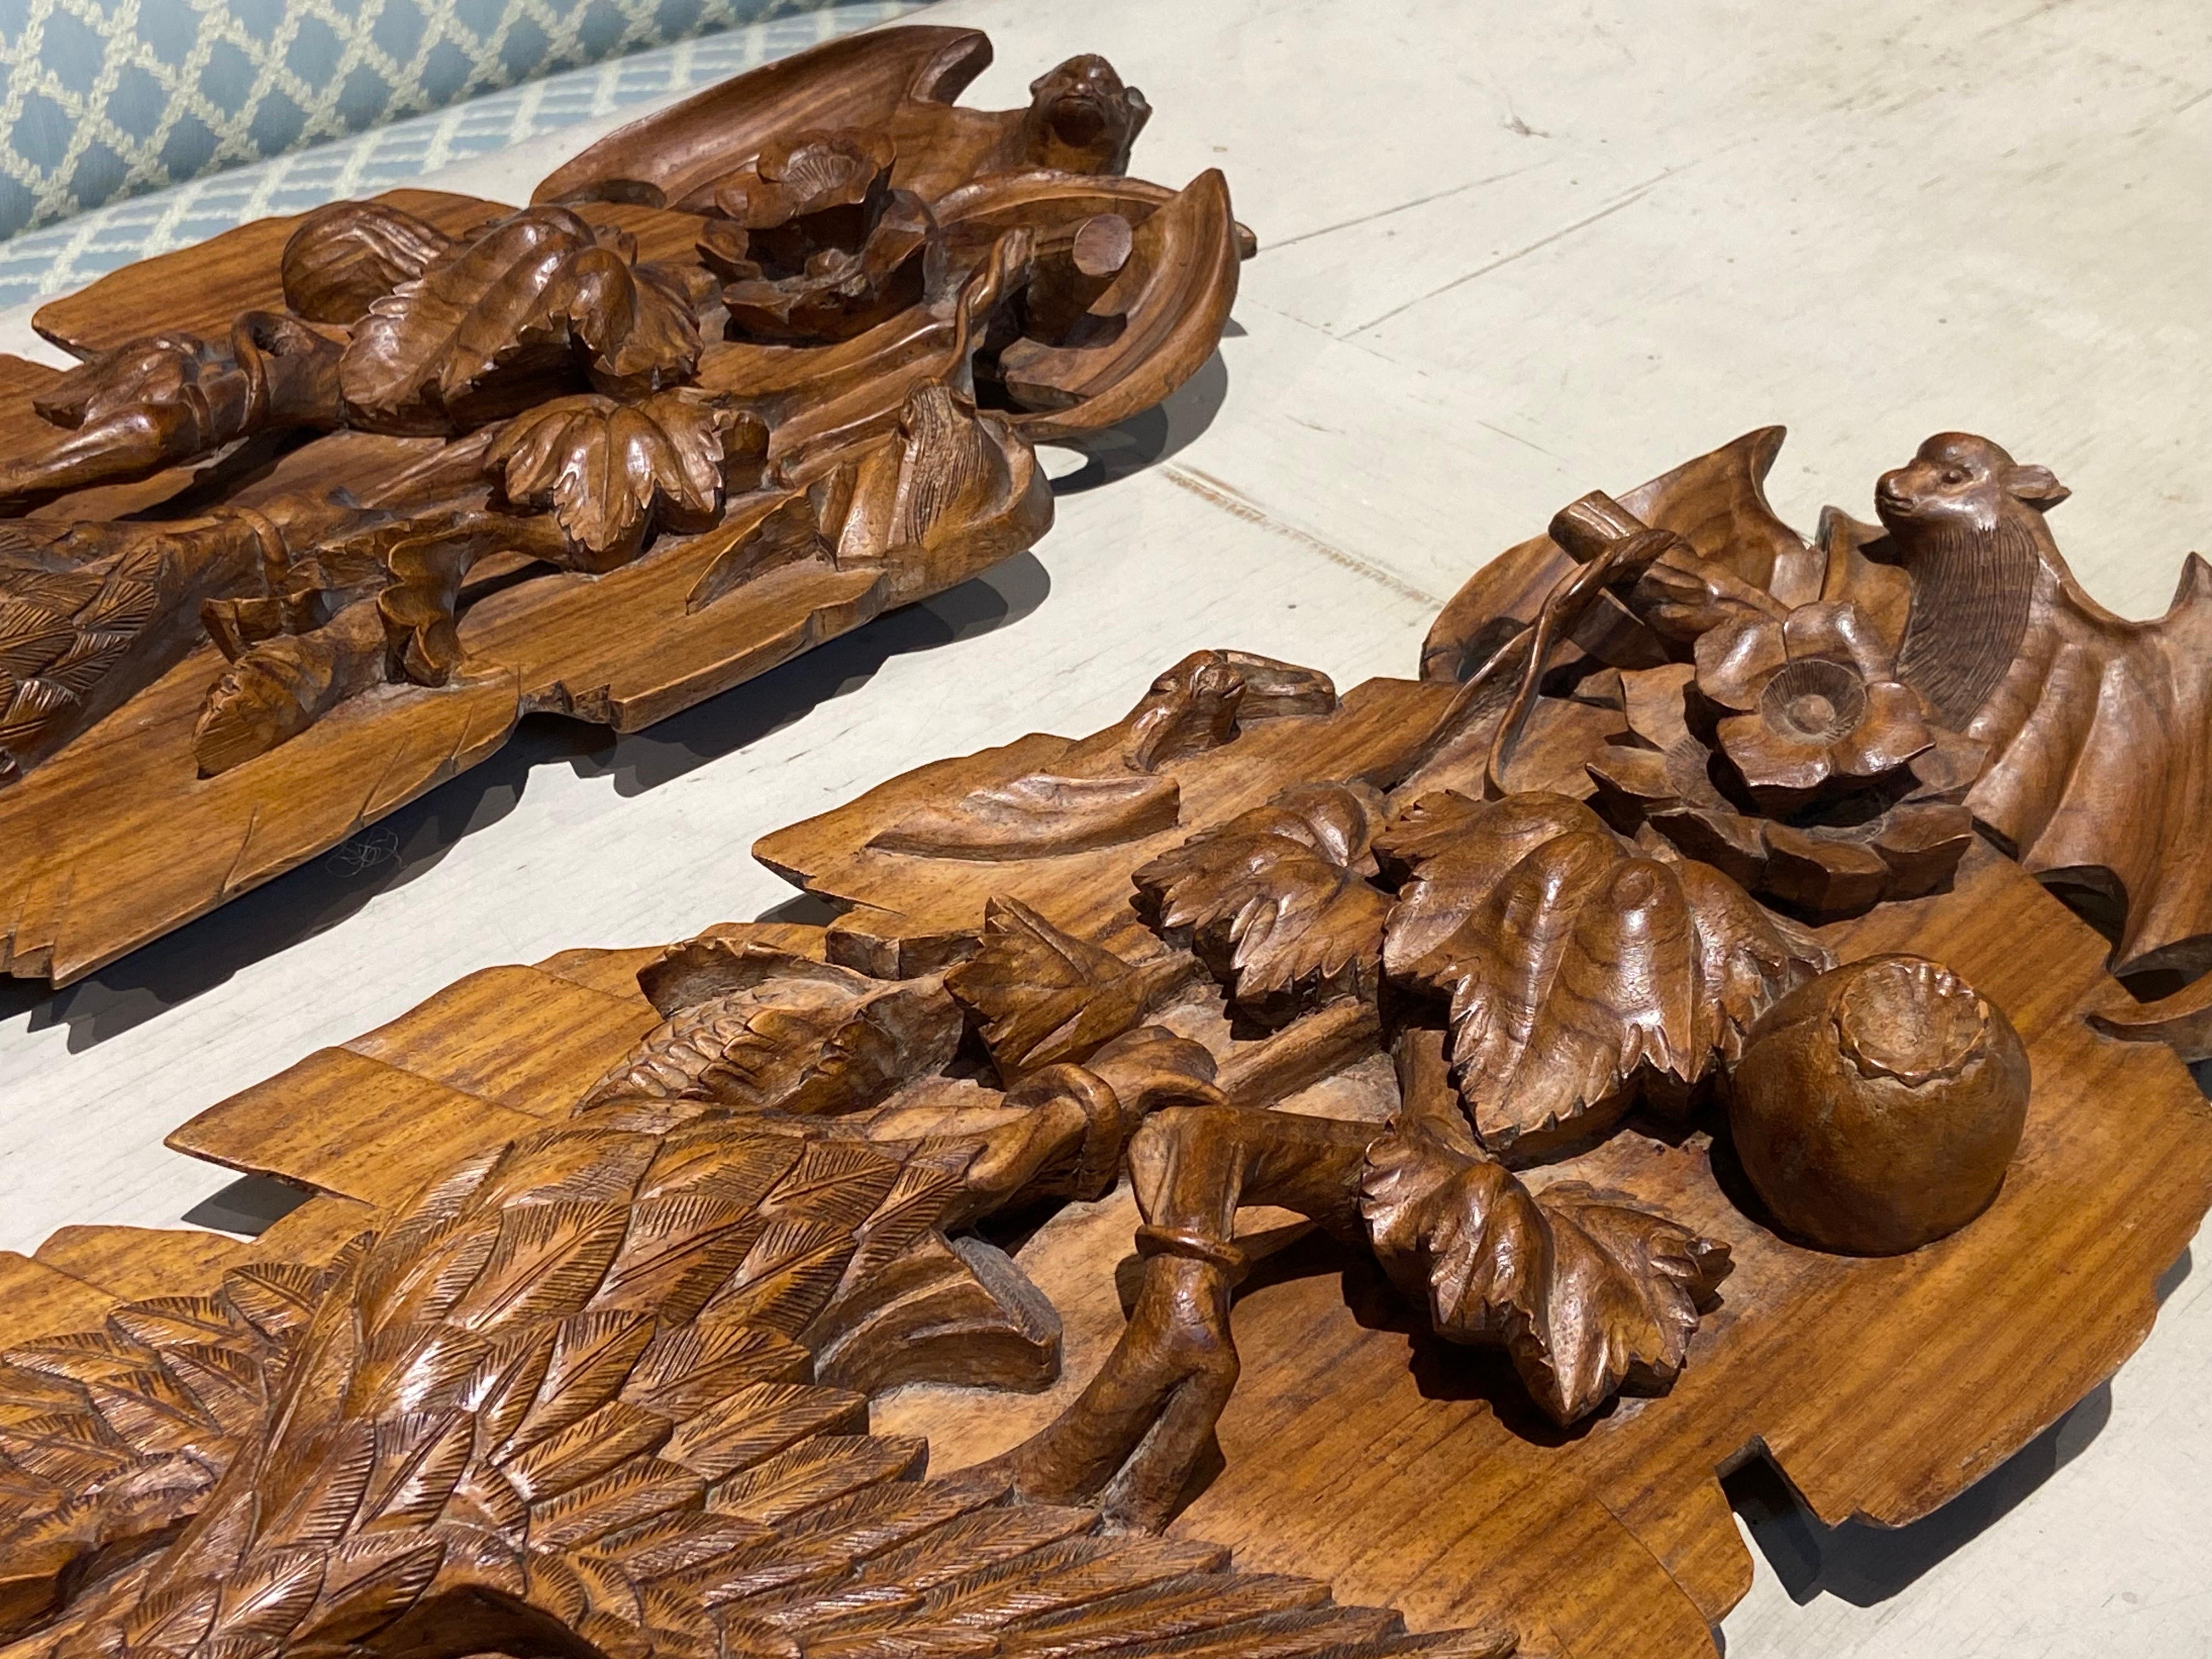 20th Century Chinese pair of long hand carved teak panels decorated with bats, birds and frogs in a very vivid way. Very good original condition without restorations.
